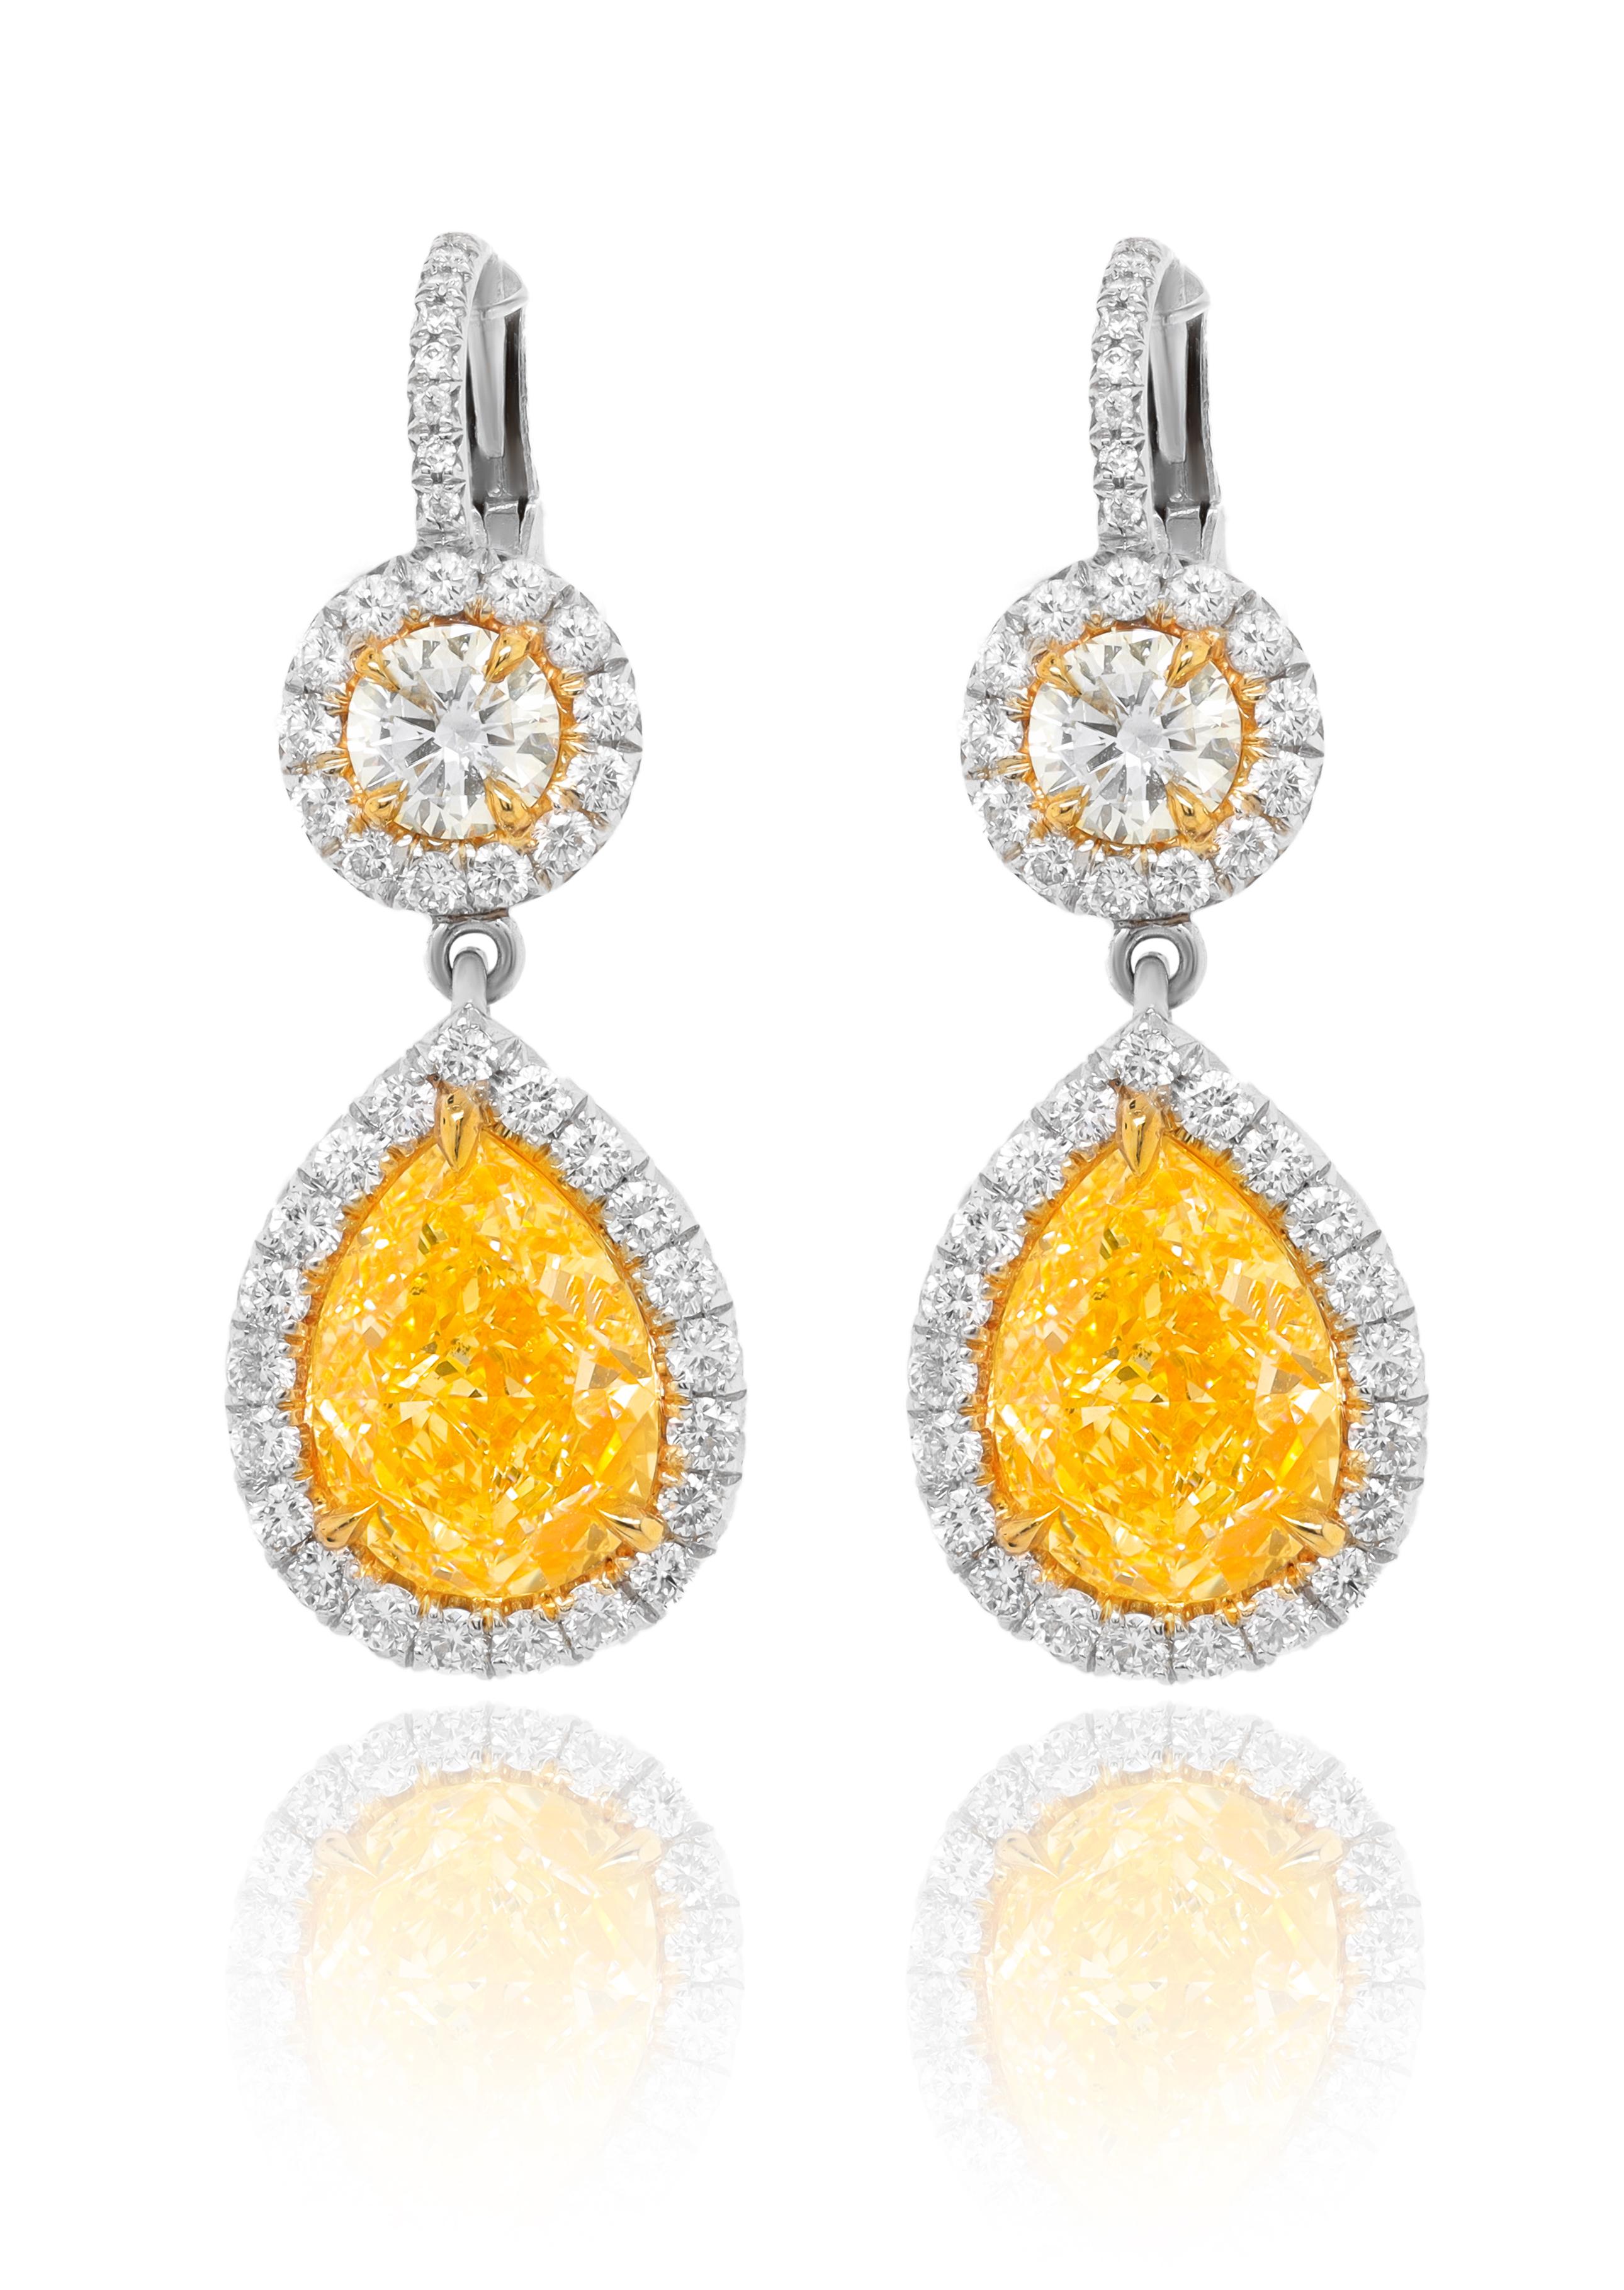 Platinum and 18kt yellow gold fancy yellow diamond earrings, gia certified features 4.54ct of two pear shaped diamonds fy vs-vs1 and 1.70ct micropave rd diamonds all around. (psc289 & psc290)
